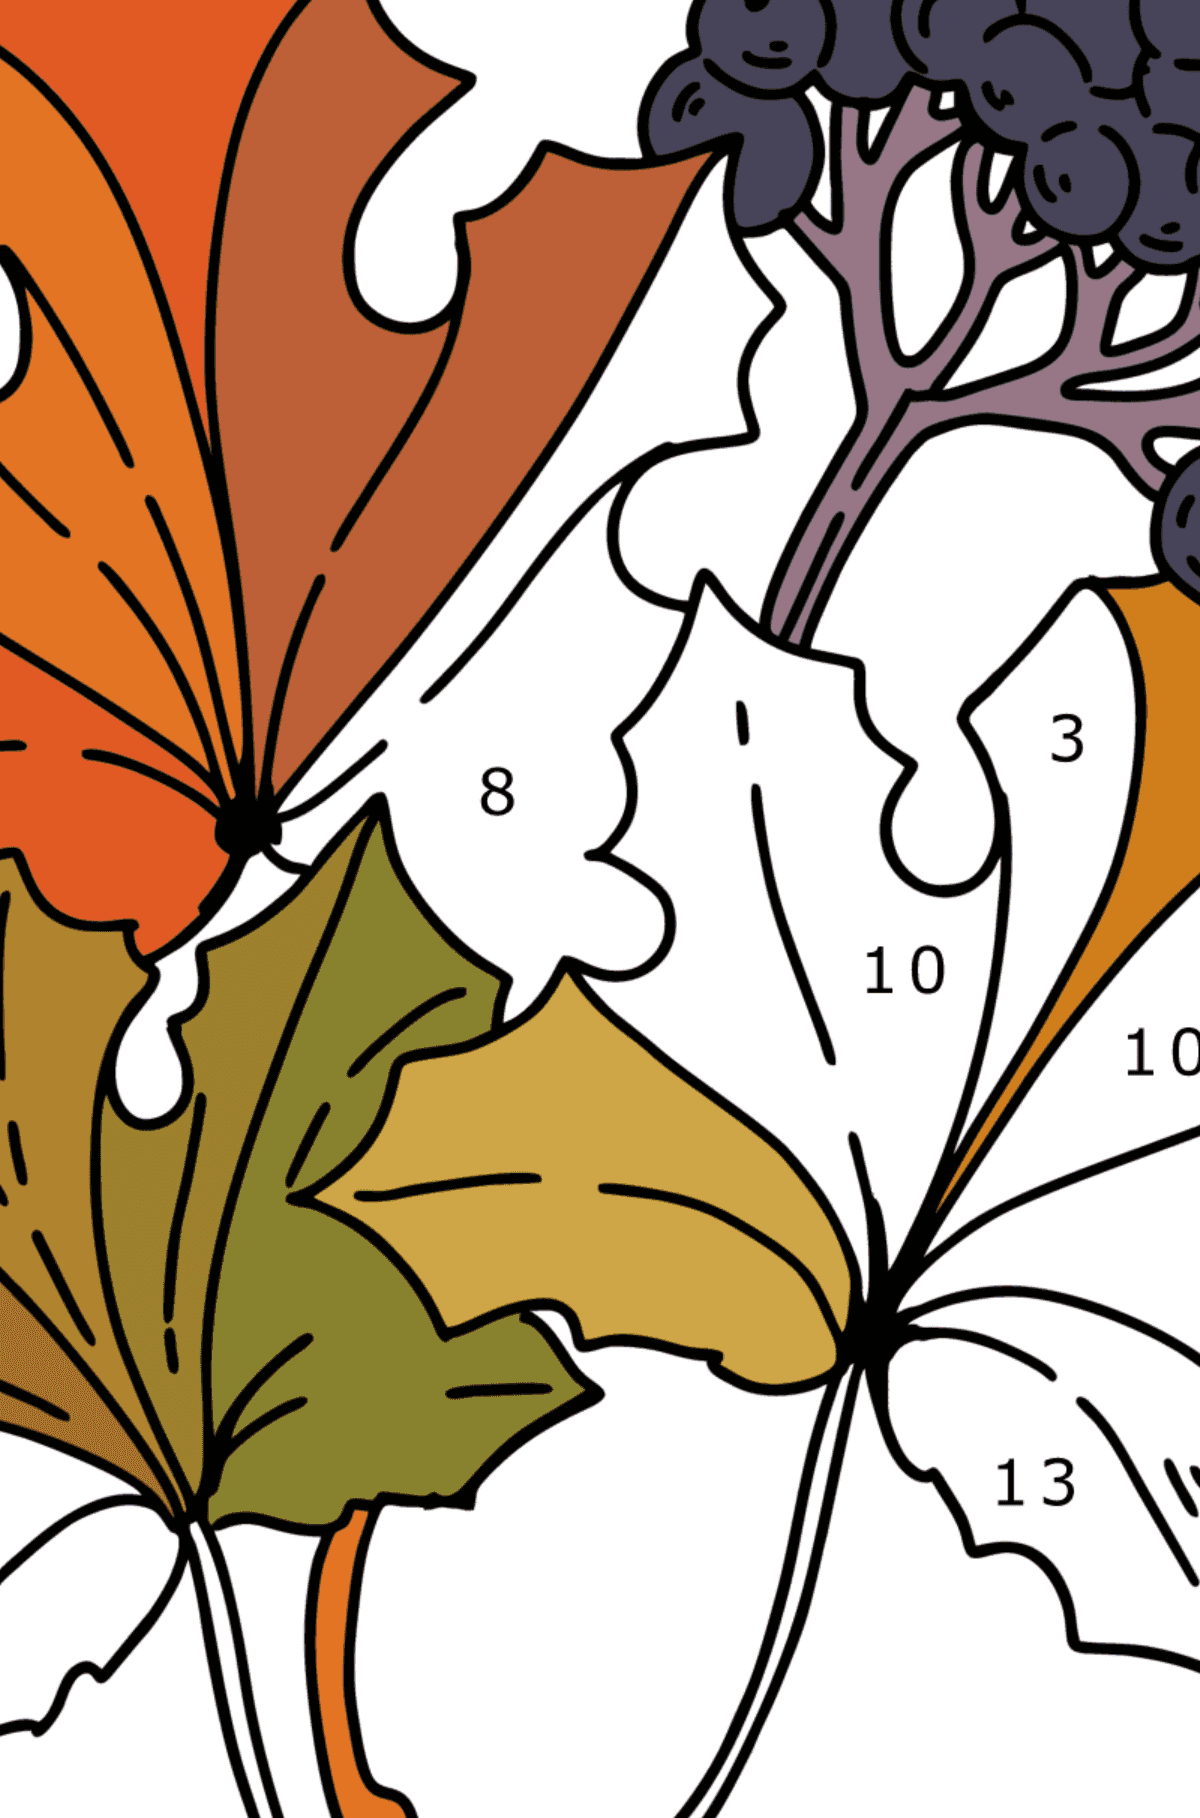 Coloring page - Maple Leaves and Elderberries - Coloring by Numbers for Kids